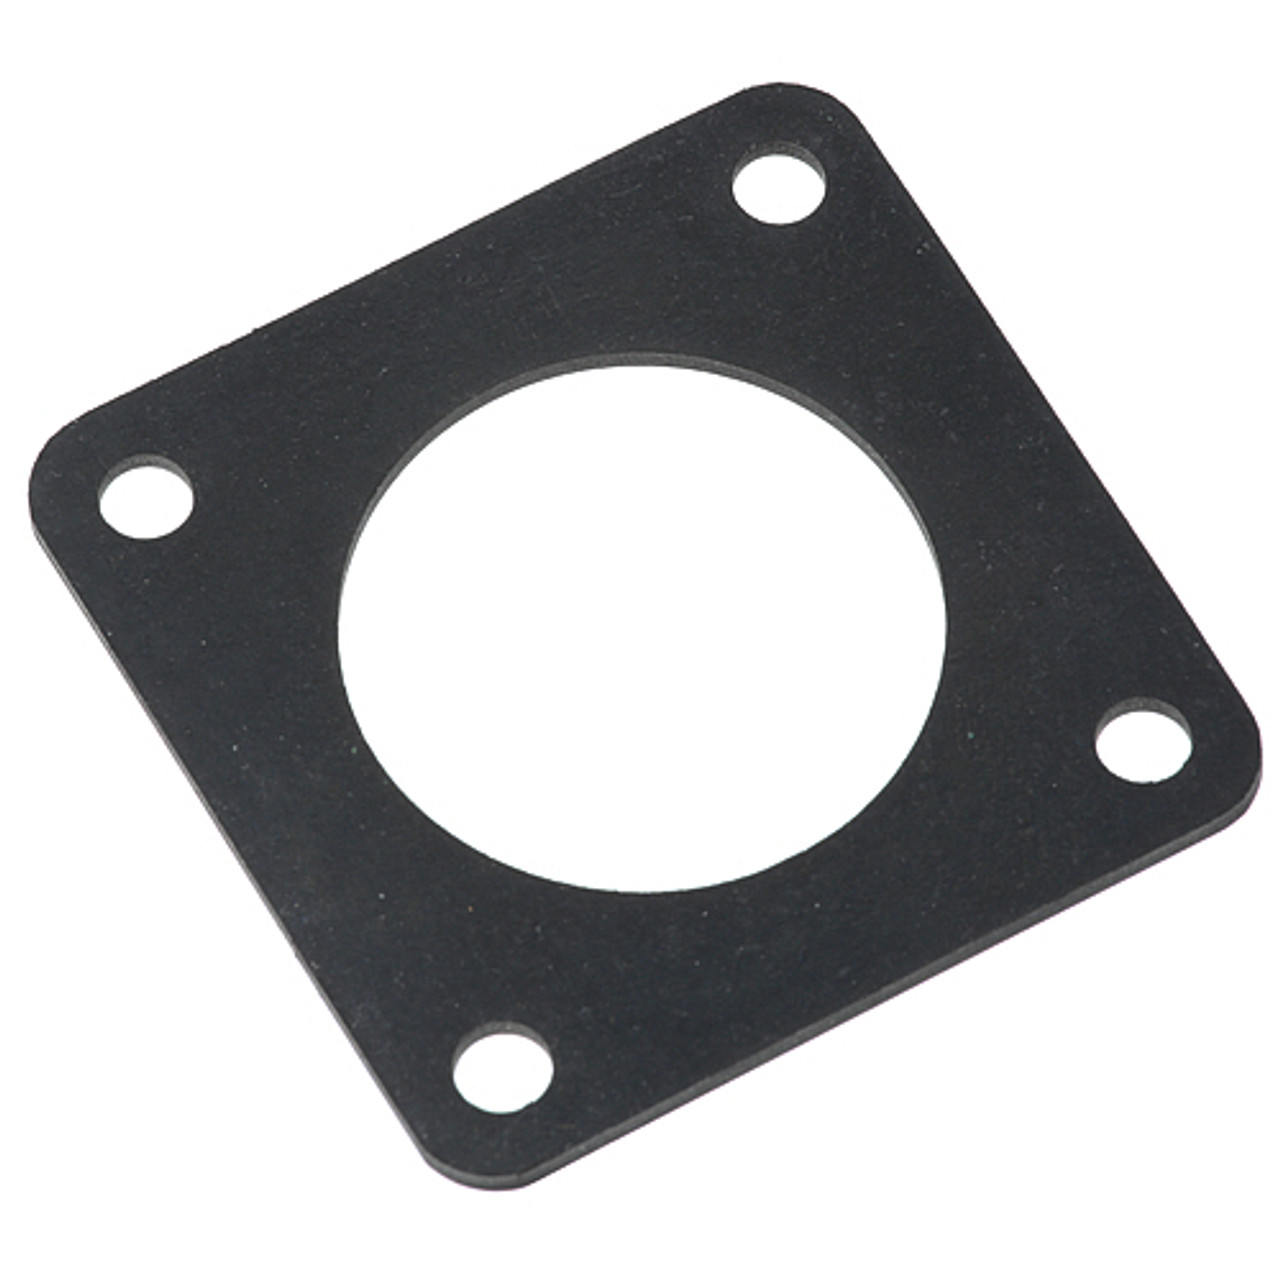 Gasket - Element - Replacement Part For Hobart 881969